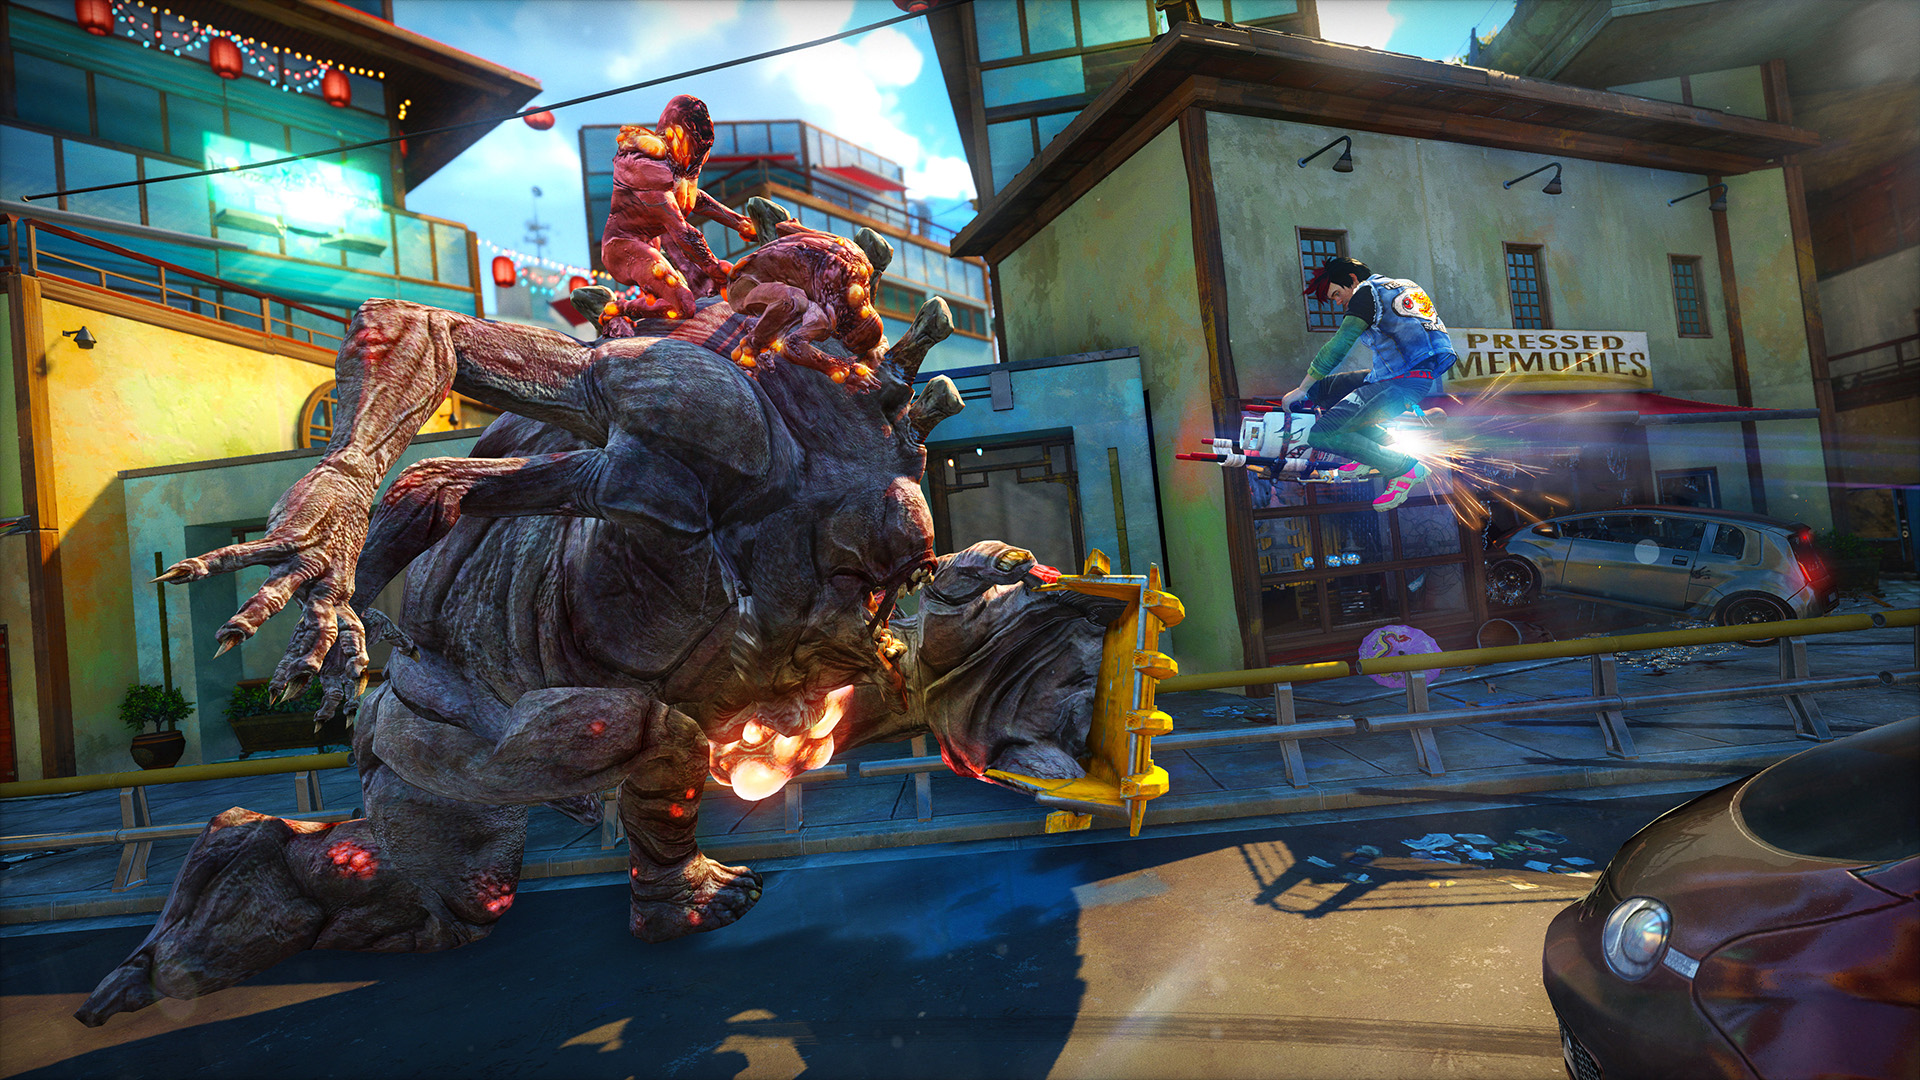 First Look at Sunset Overdrive